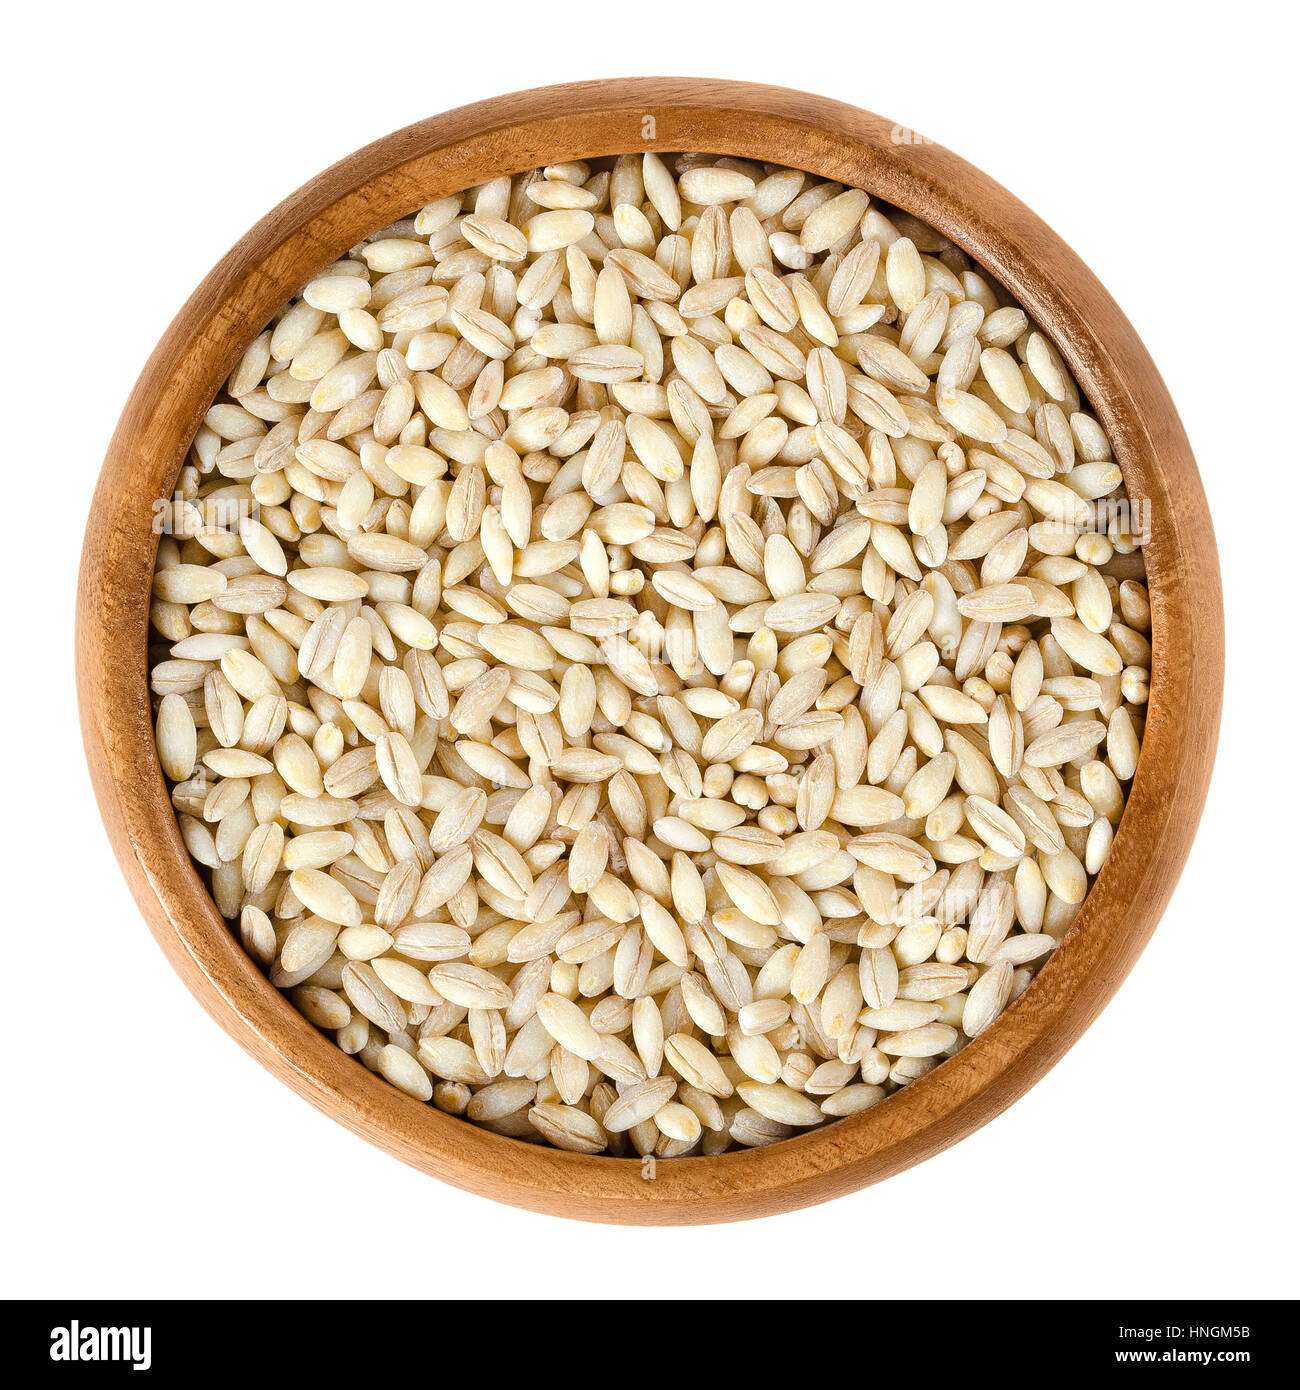 Processed pearl barley in wooden bowl. Uncooked pearled barley without hull and bran. Hordeum vulgare, a major cereal grain. Stock Photo